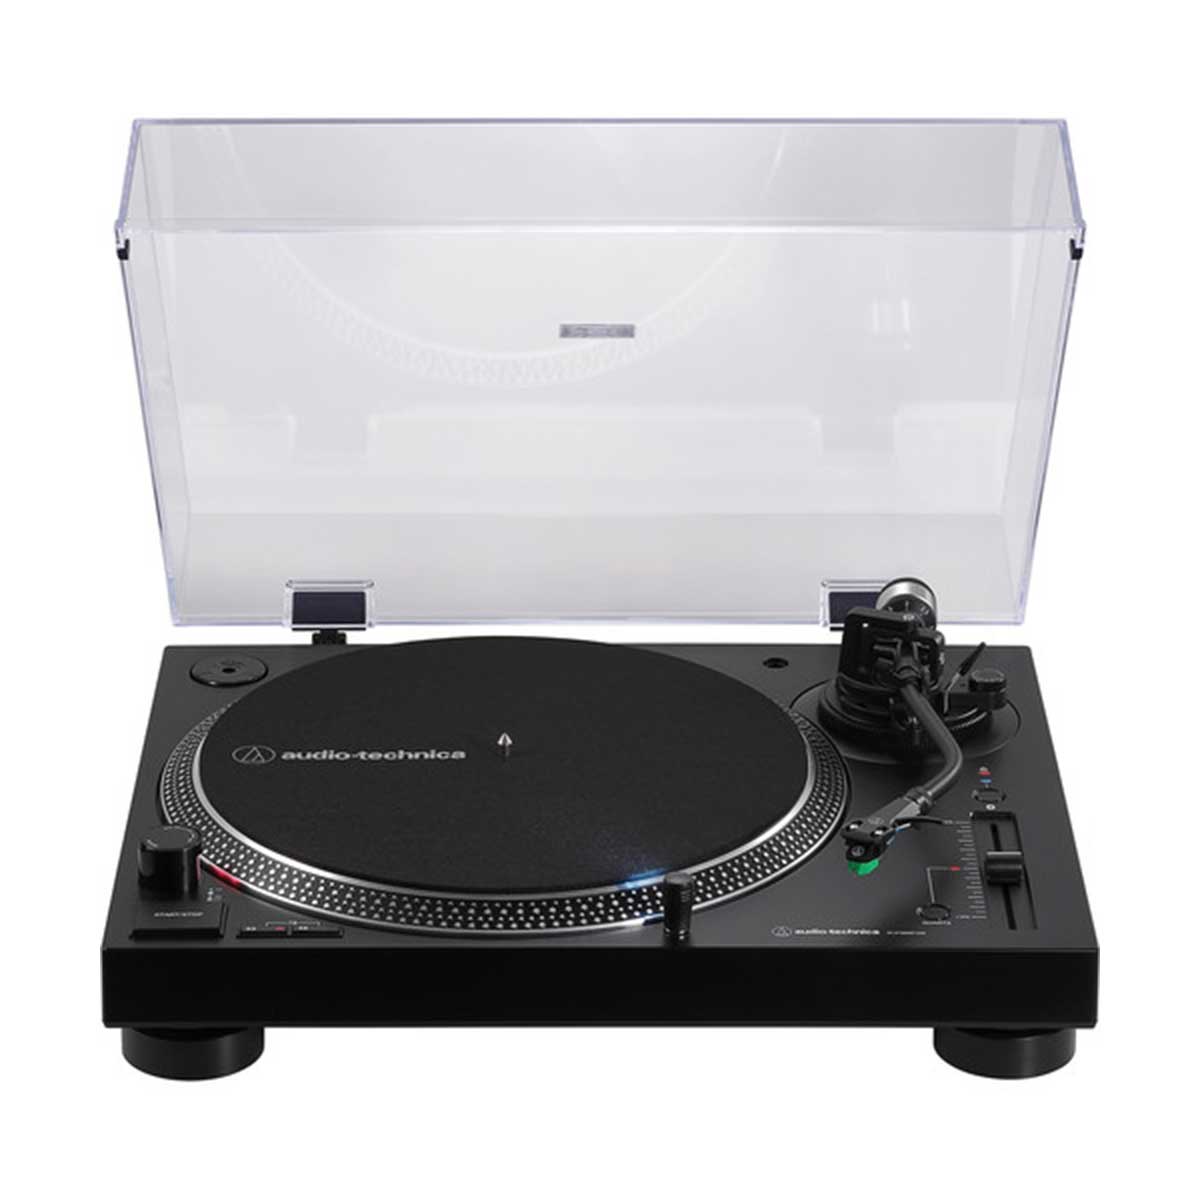 Audio-Technica LP-120xBT-USB Fully Manual Bluetooth Turntable with Bluetooth (Black)